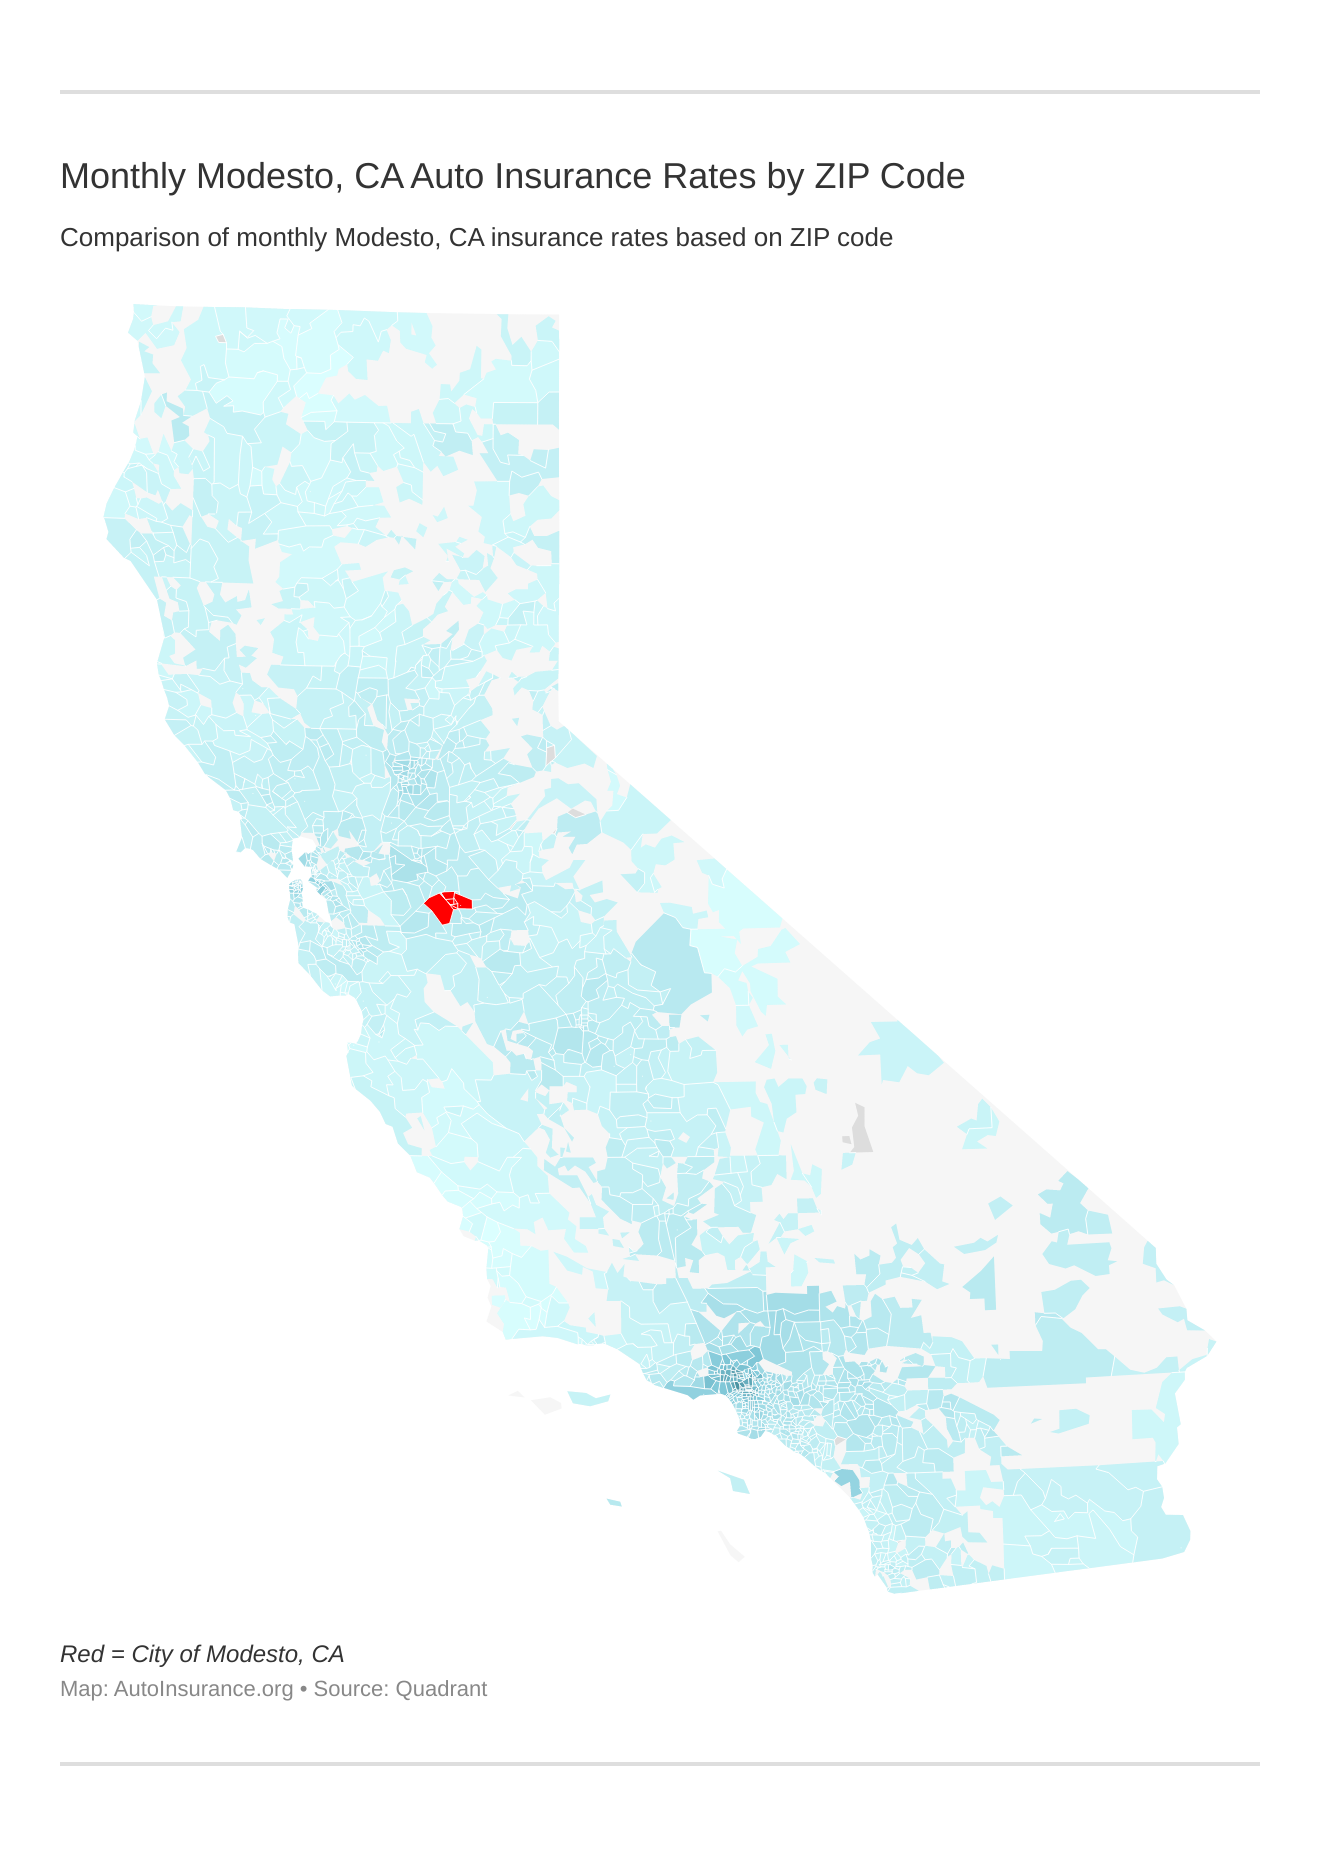 Monthly Modesto, CA Auto Insurance Rates by ZIP Code